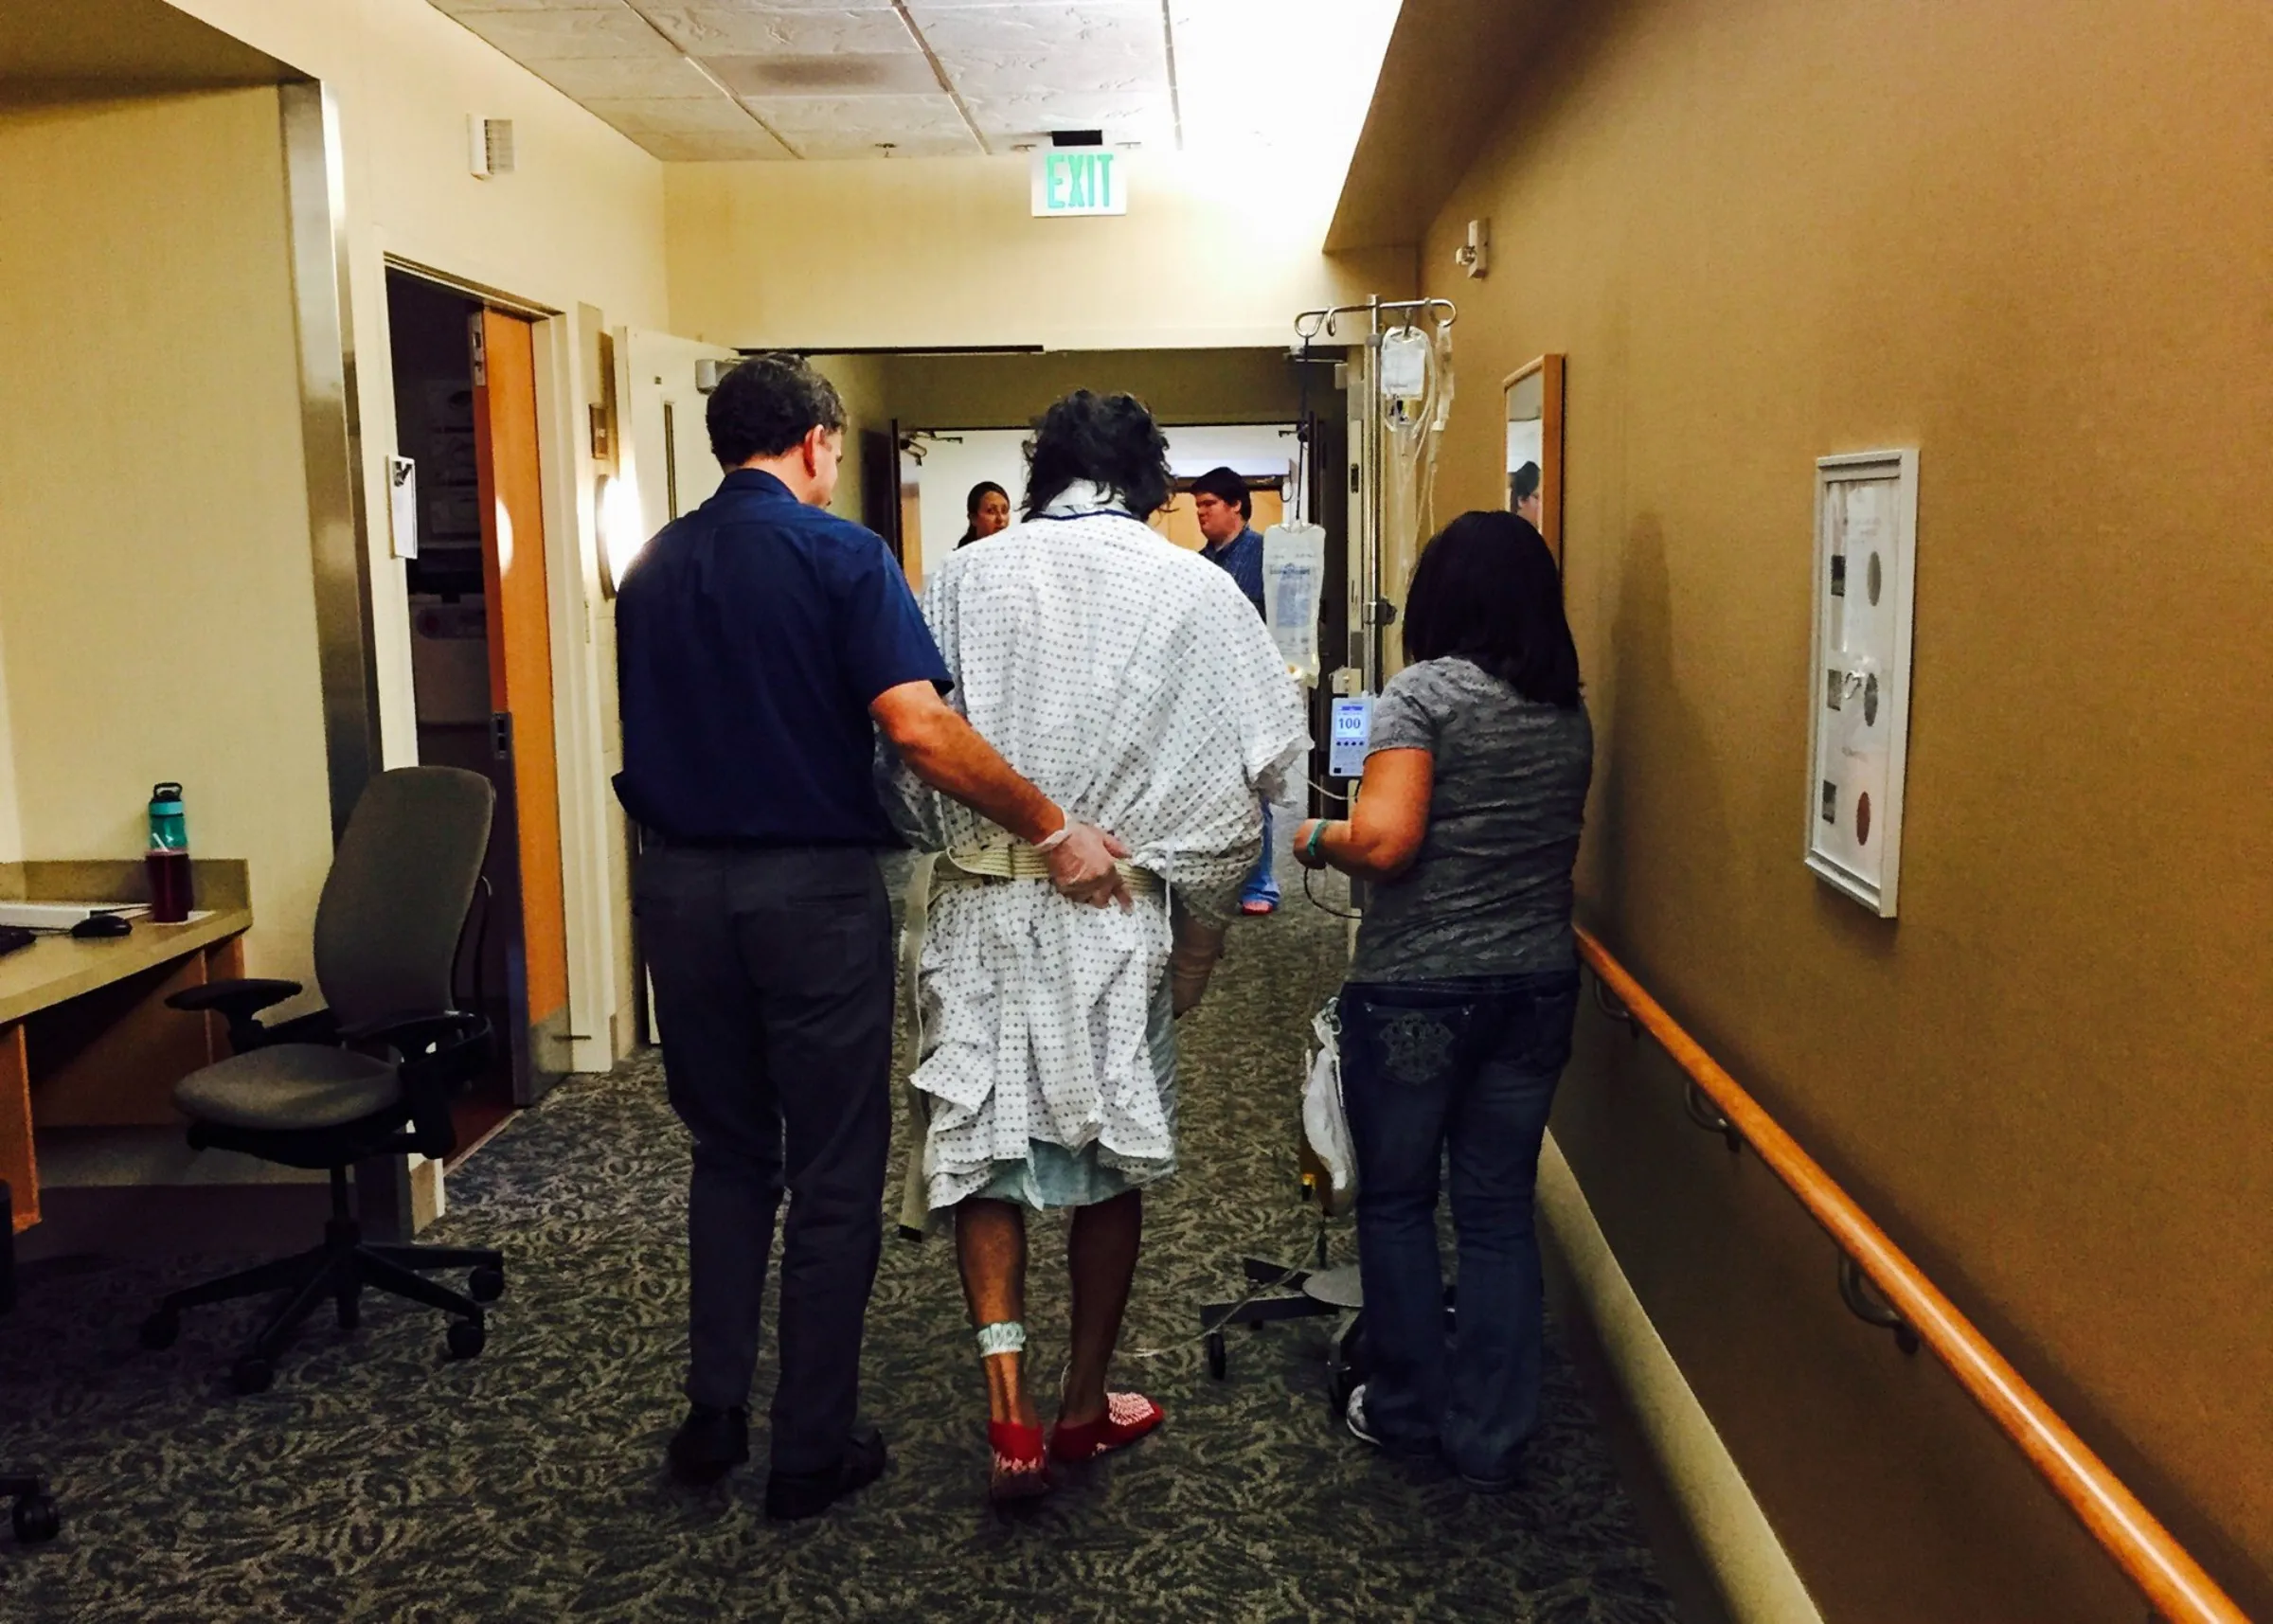 Richard 'Wally' Ochoa walks down a hospital corridor after being hit by a falling tree while defending a small Idaho community from a wildfire, in this undated photo